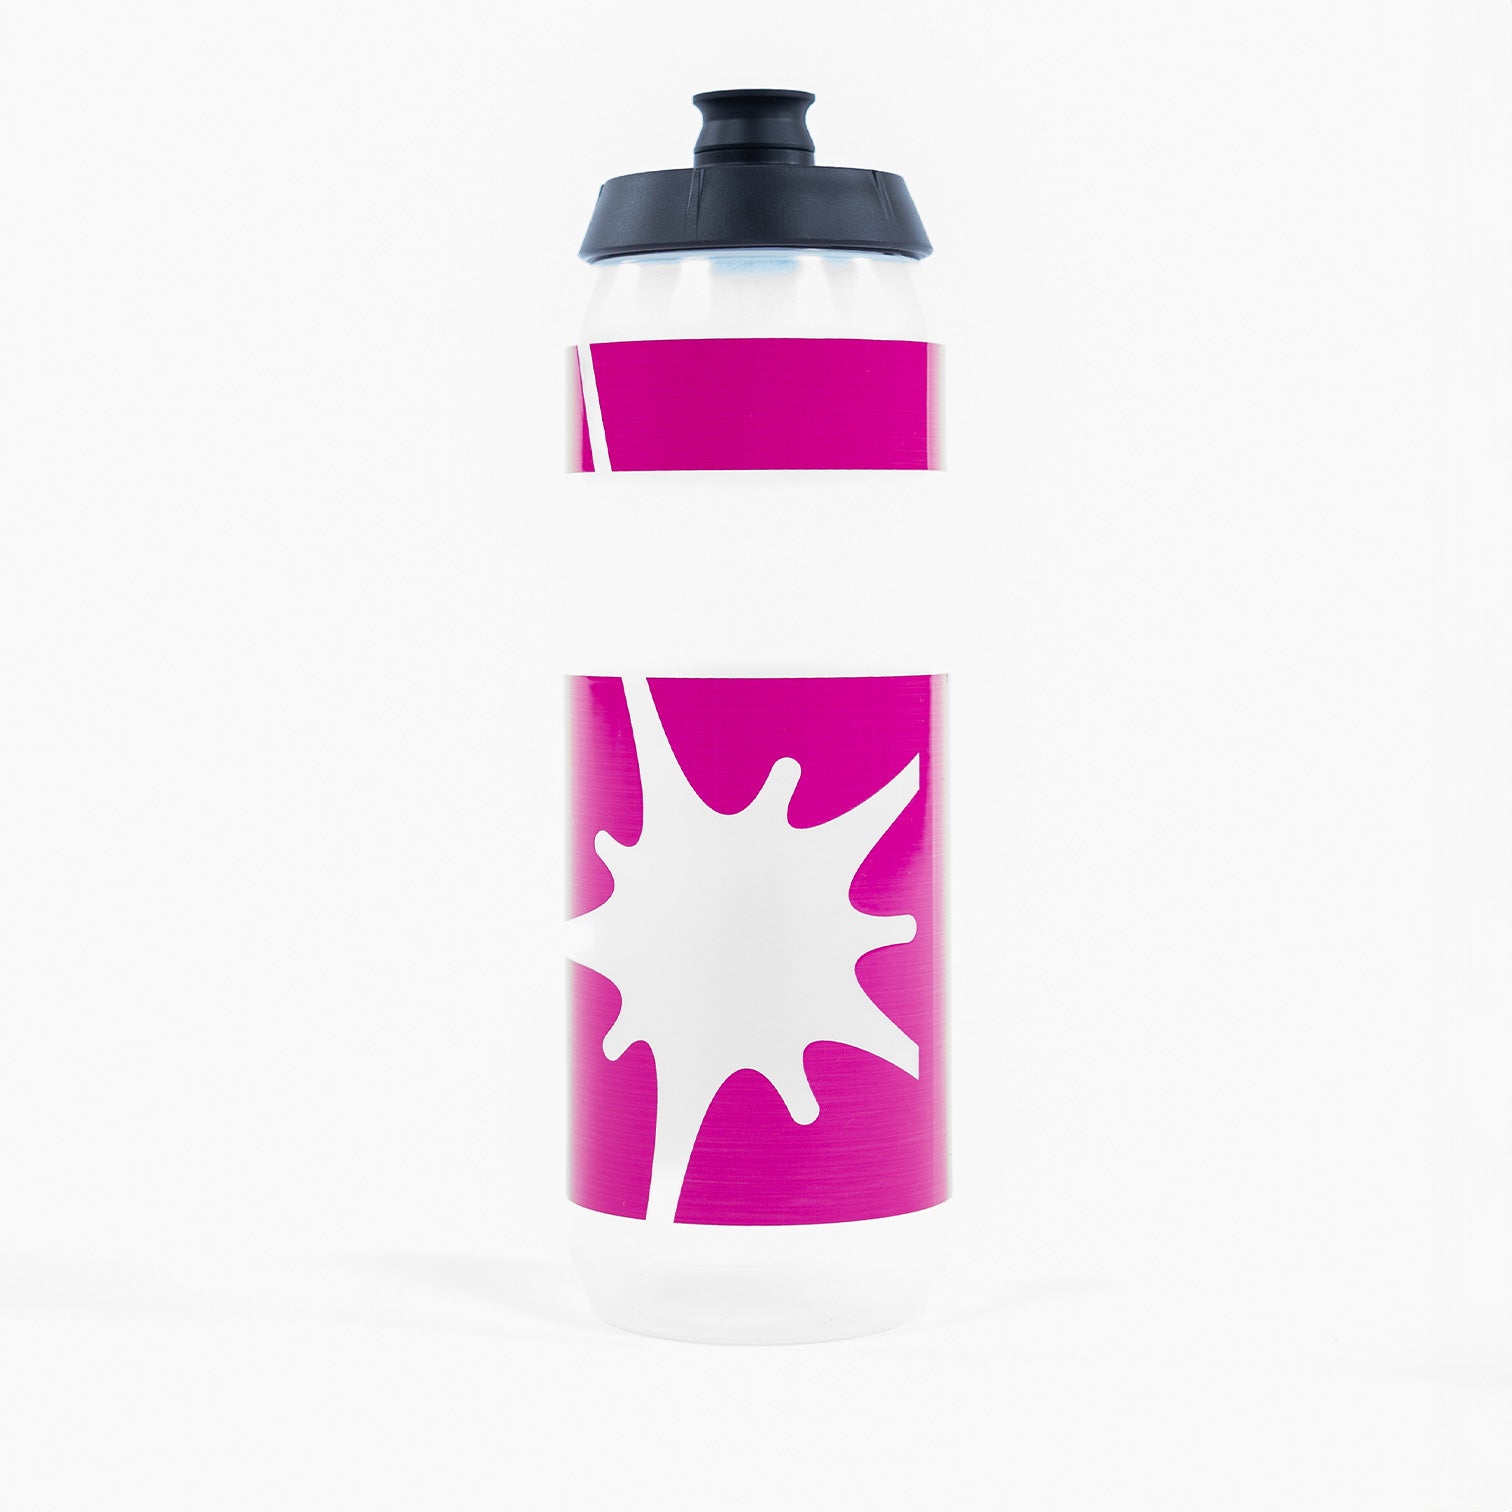 On-One 750ml Water Bottle / Clear & Pink